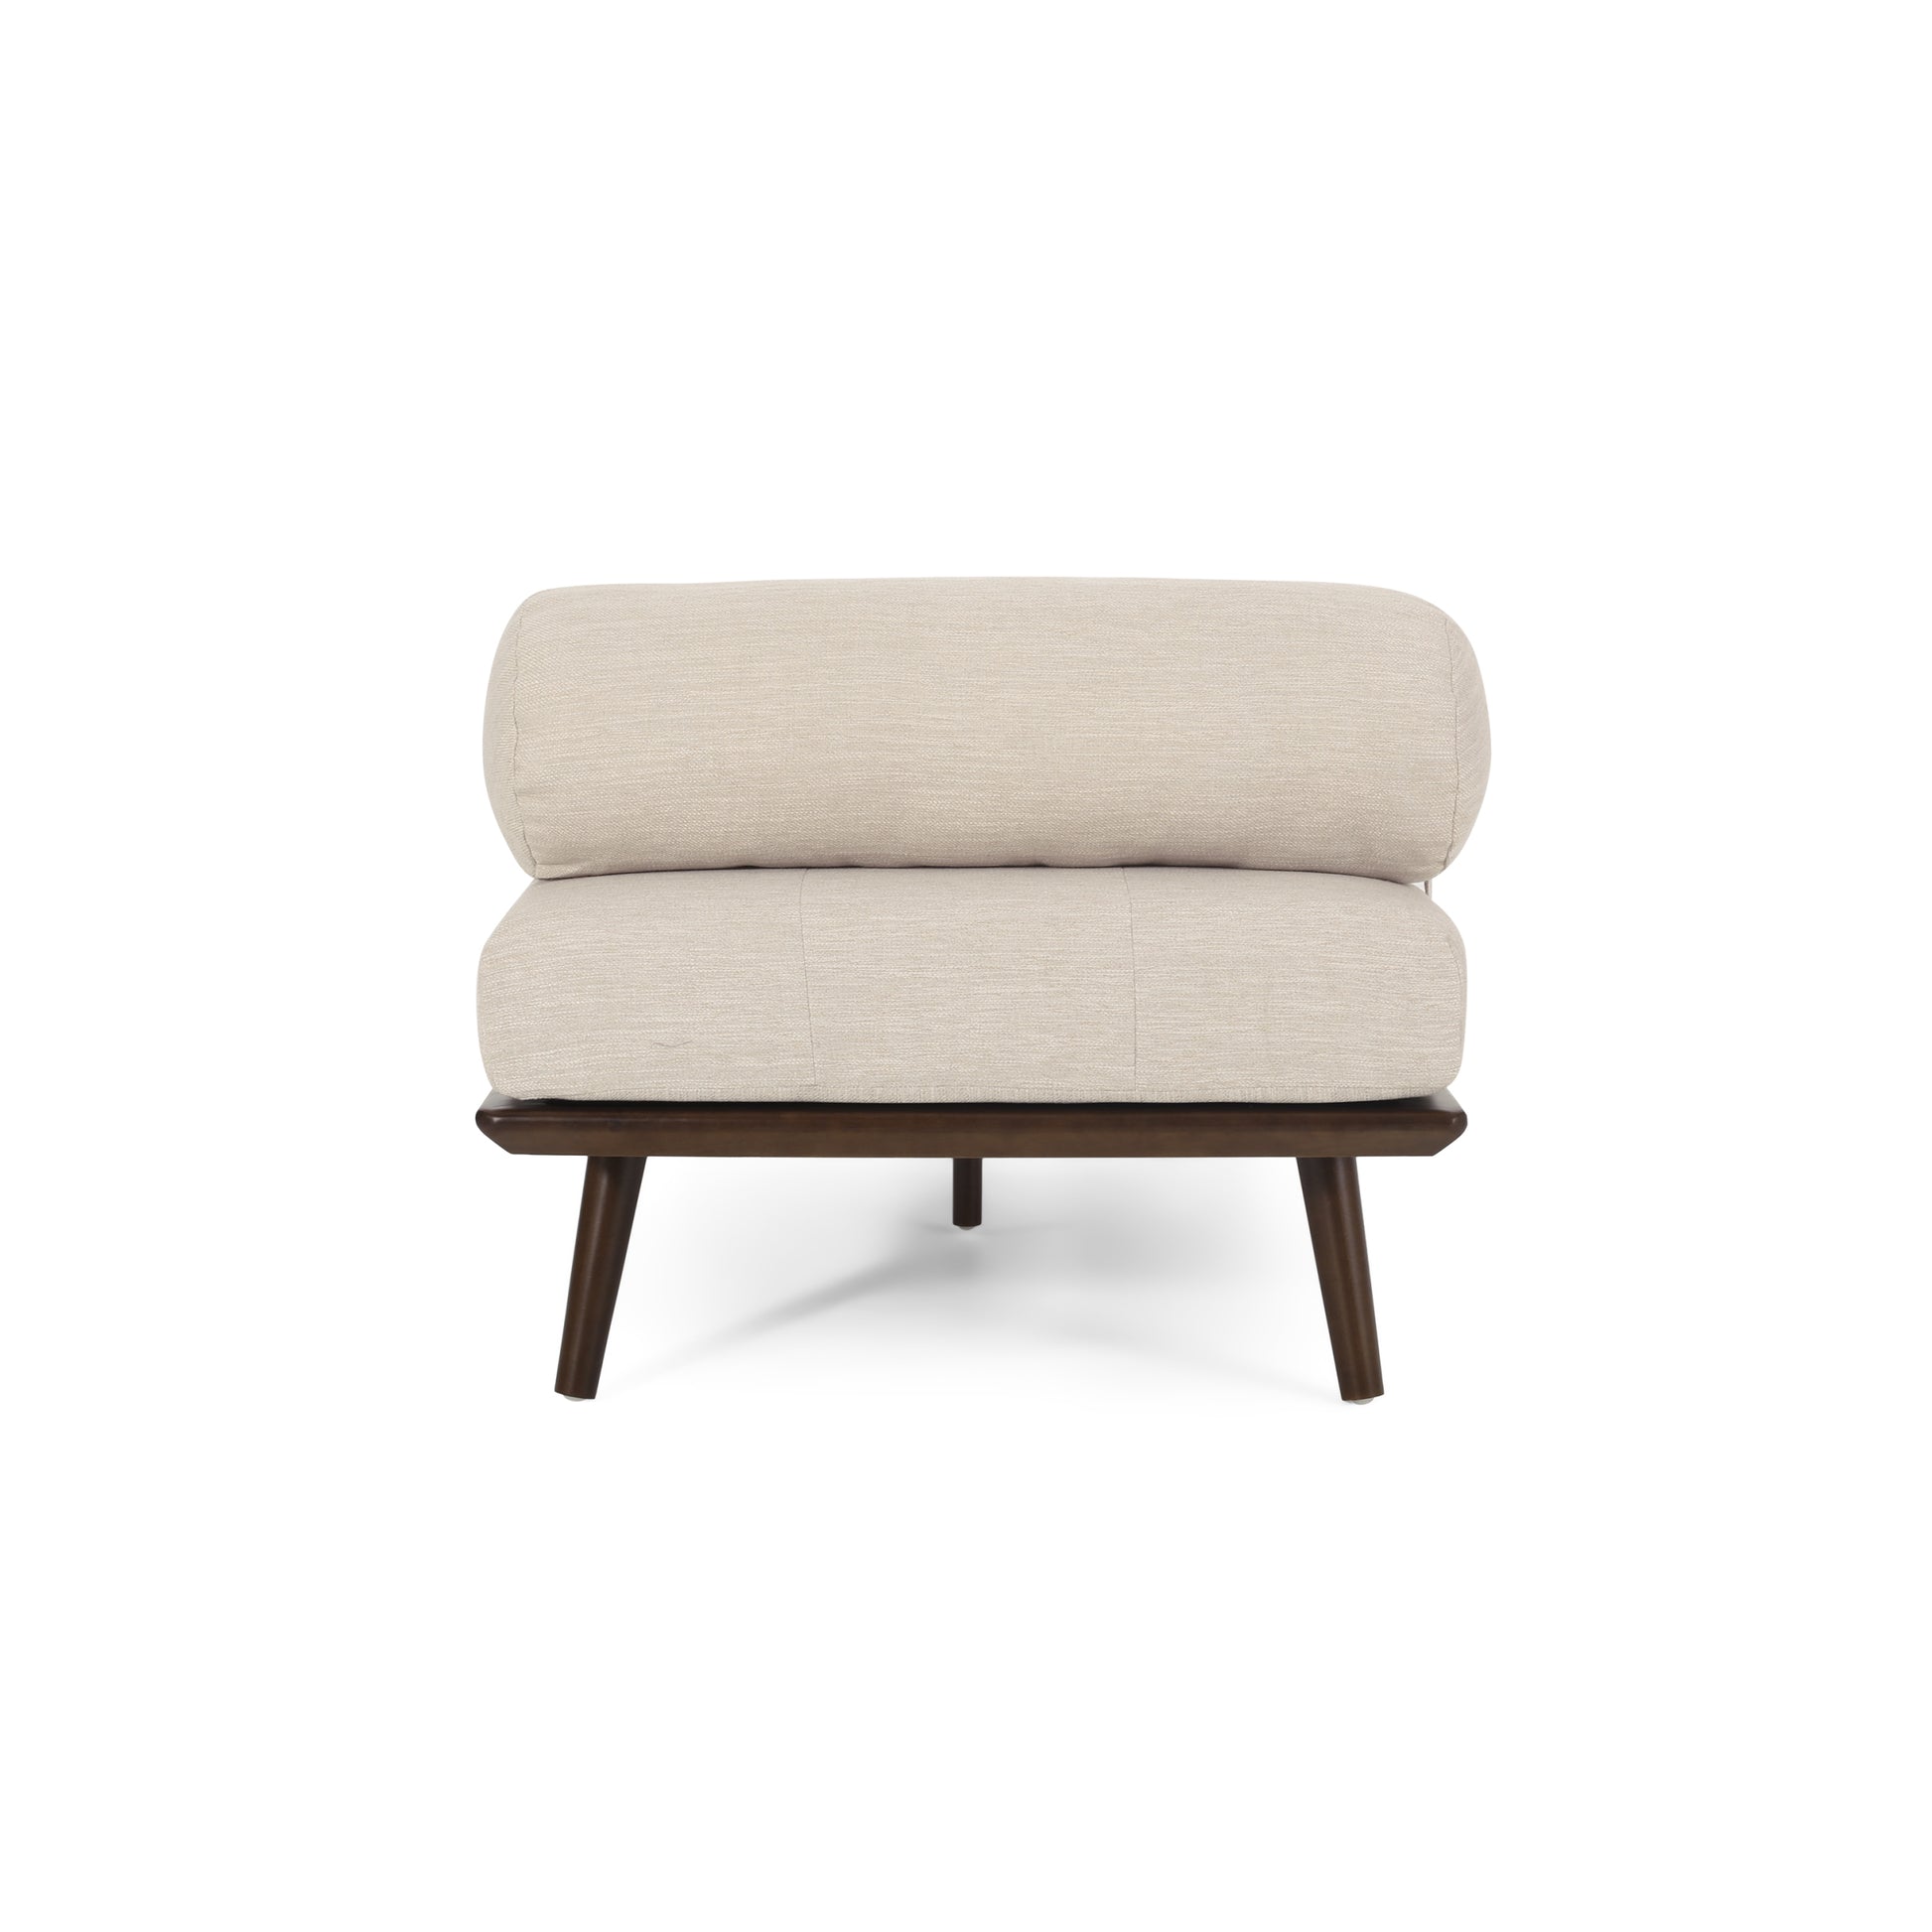 Chaise Lounge - Beige Fabric